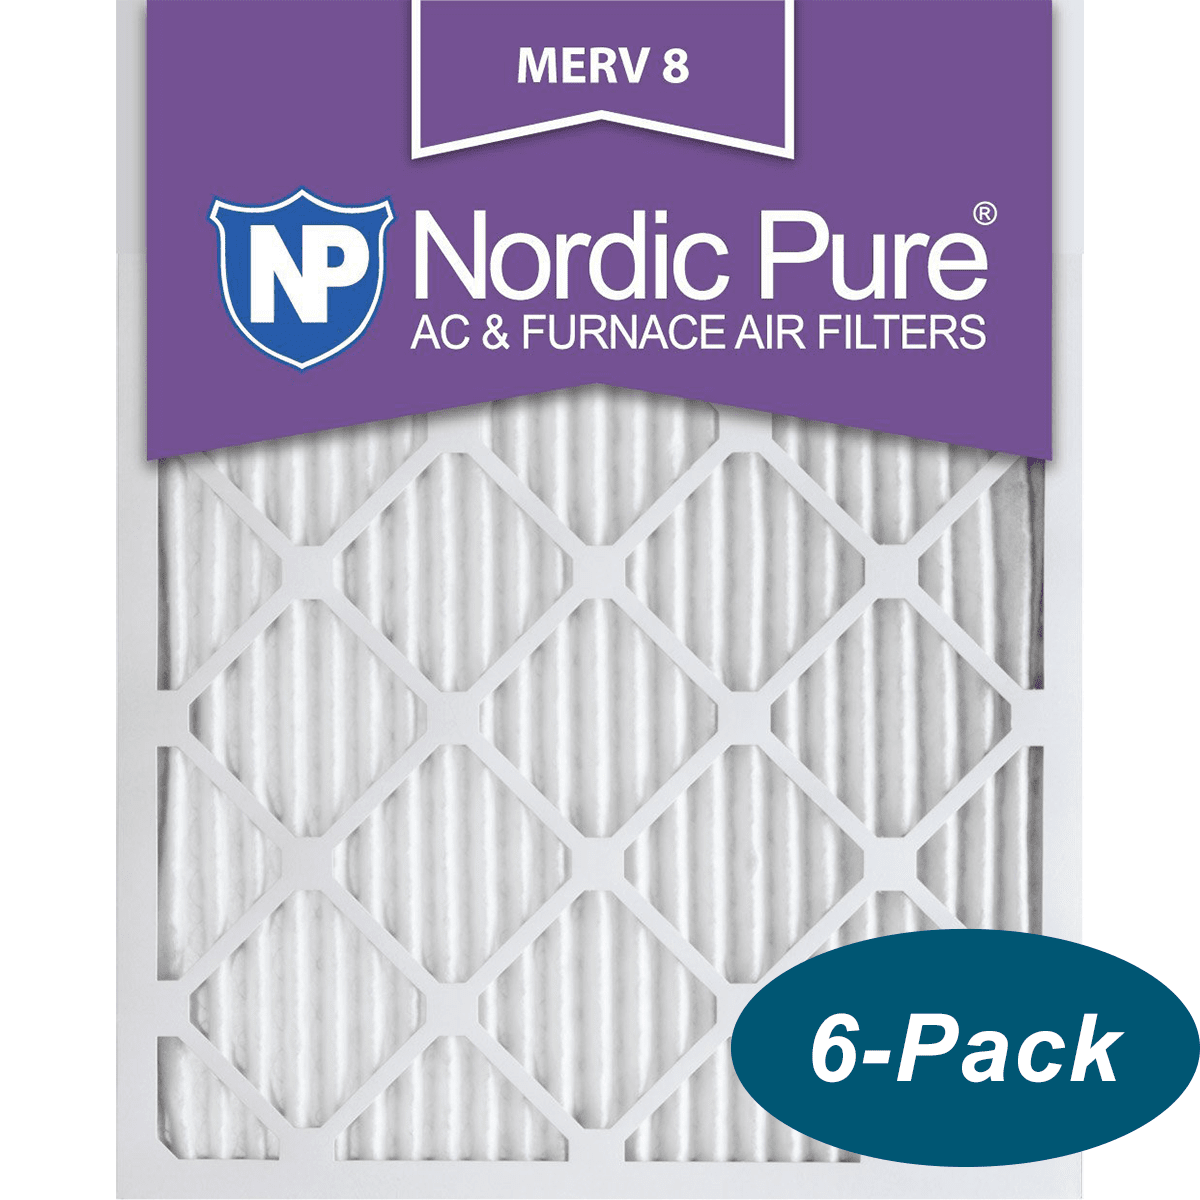 Nordic Pure MERV 8 Pleated Furnace Filter 16x20x1 6-Pack (16x20x1M8-6)